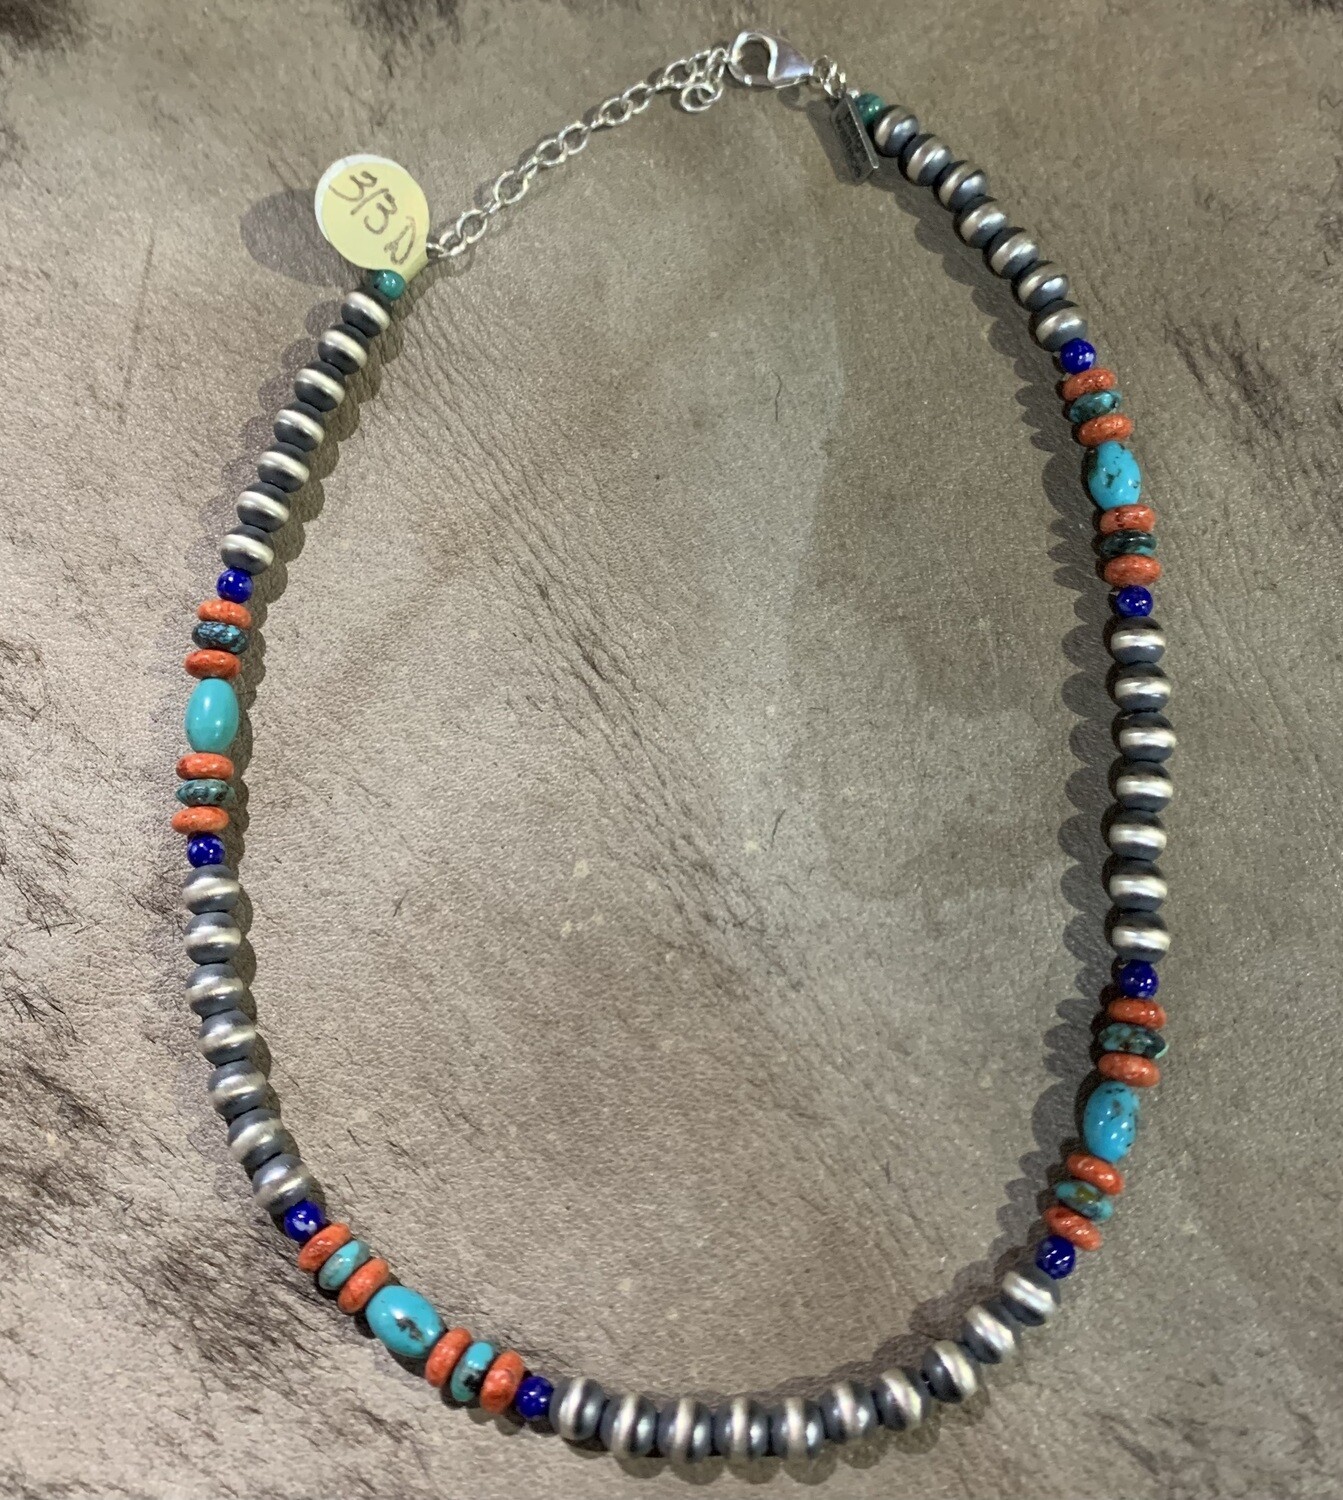 PAIGE WALLACE SS NAV PEARL MIX NECKLACE